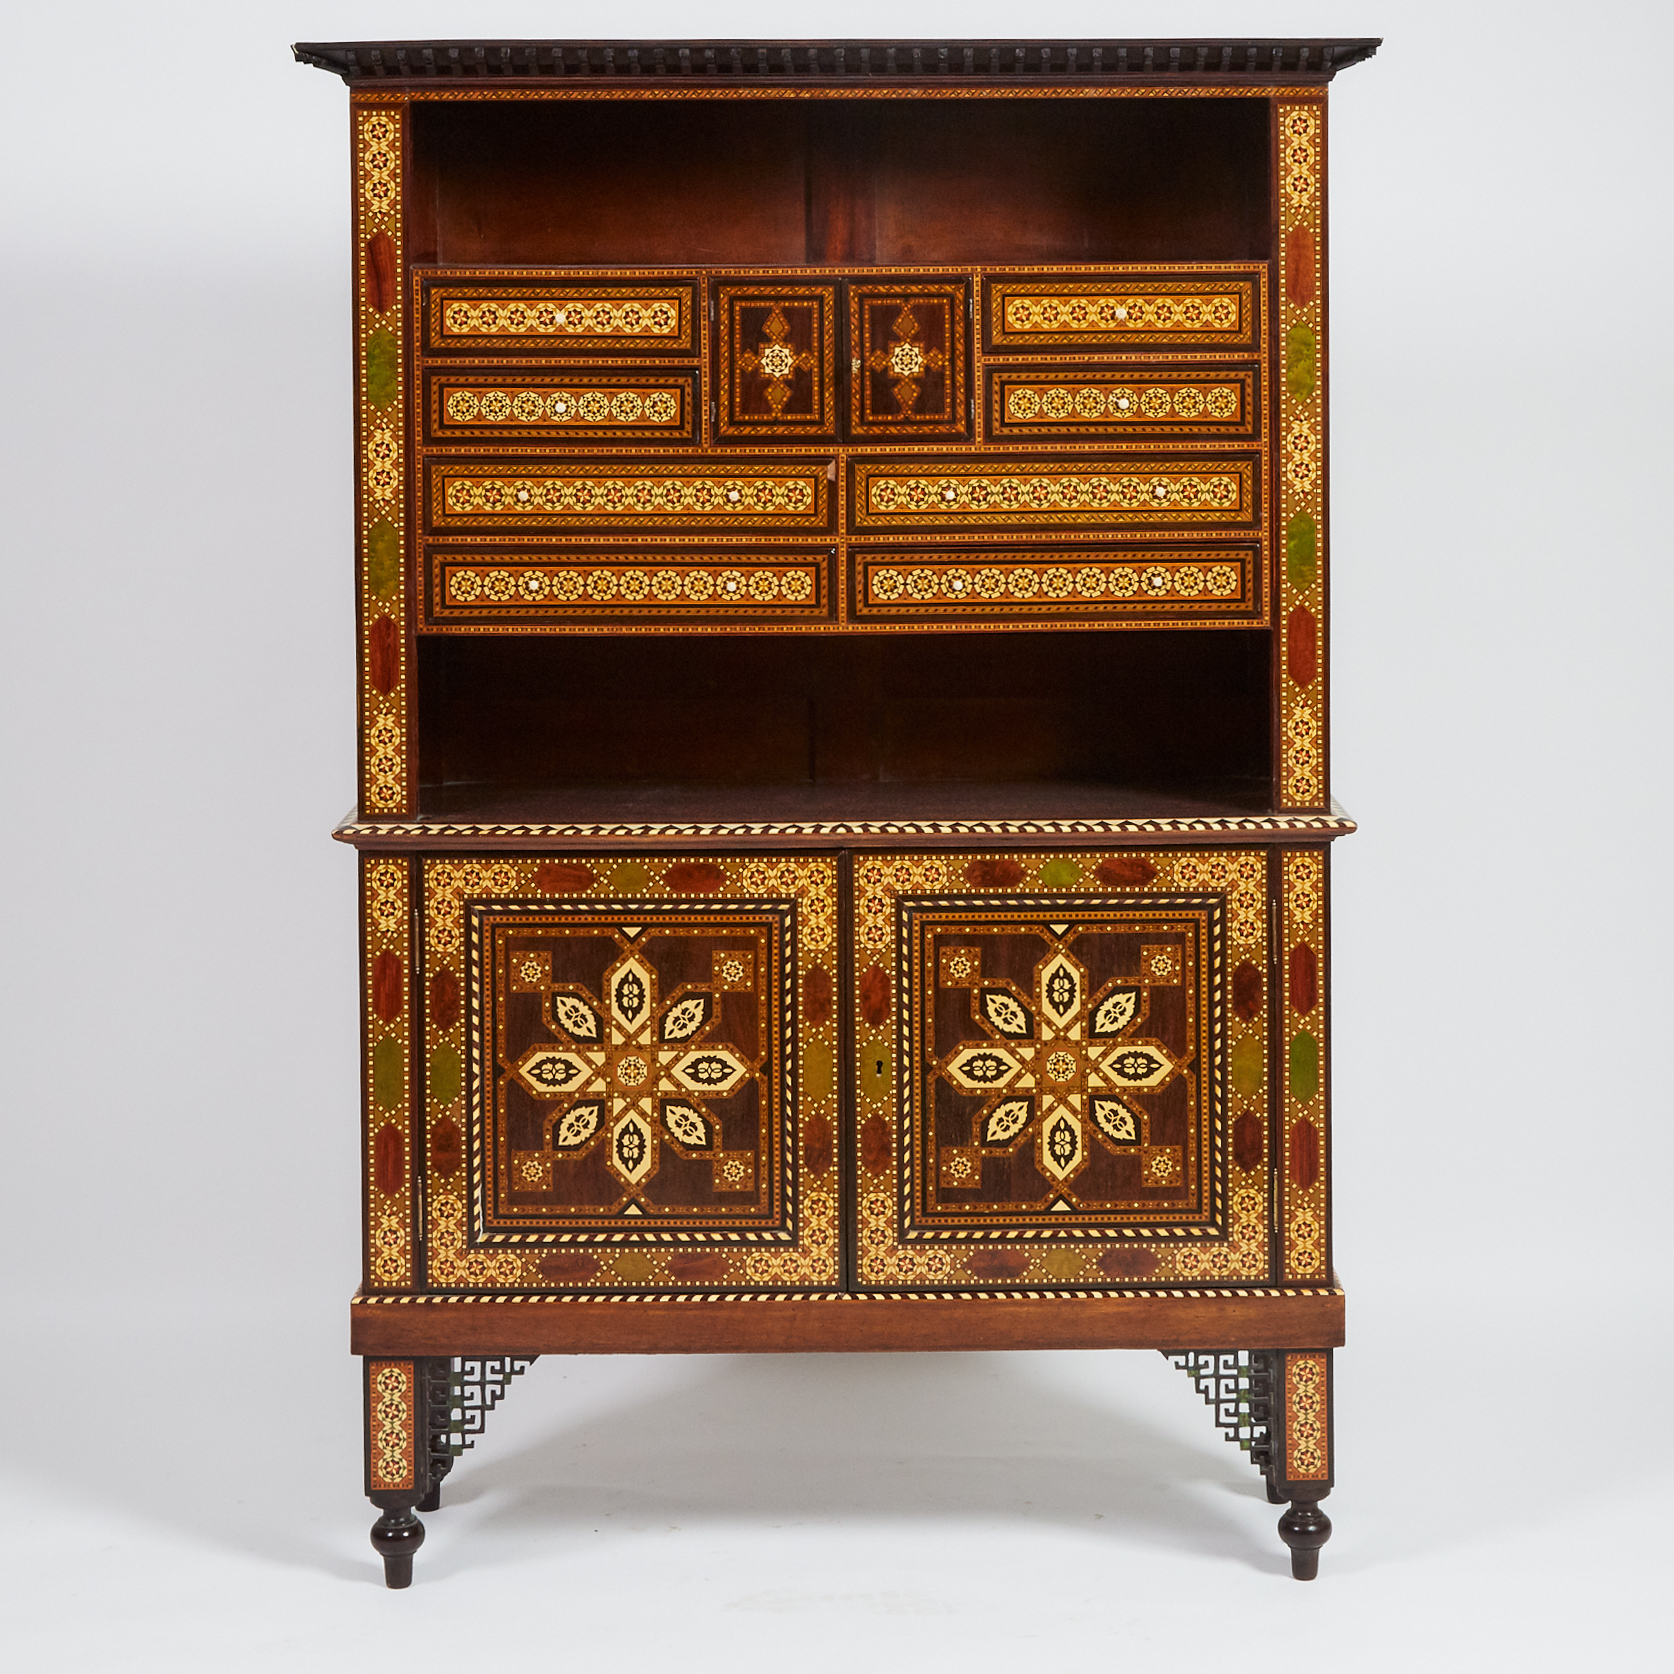 Syrian Bone and Exotic Mixed Wood Parquetry Cabinet, early 20th century